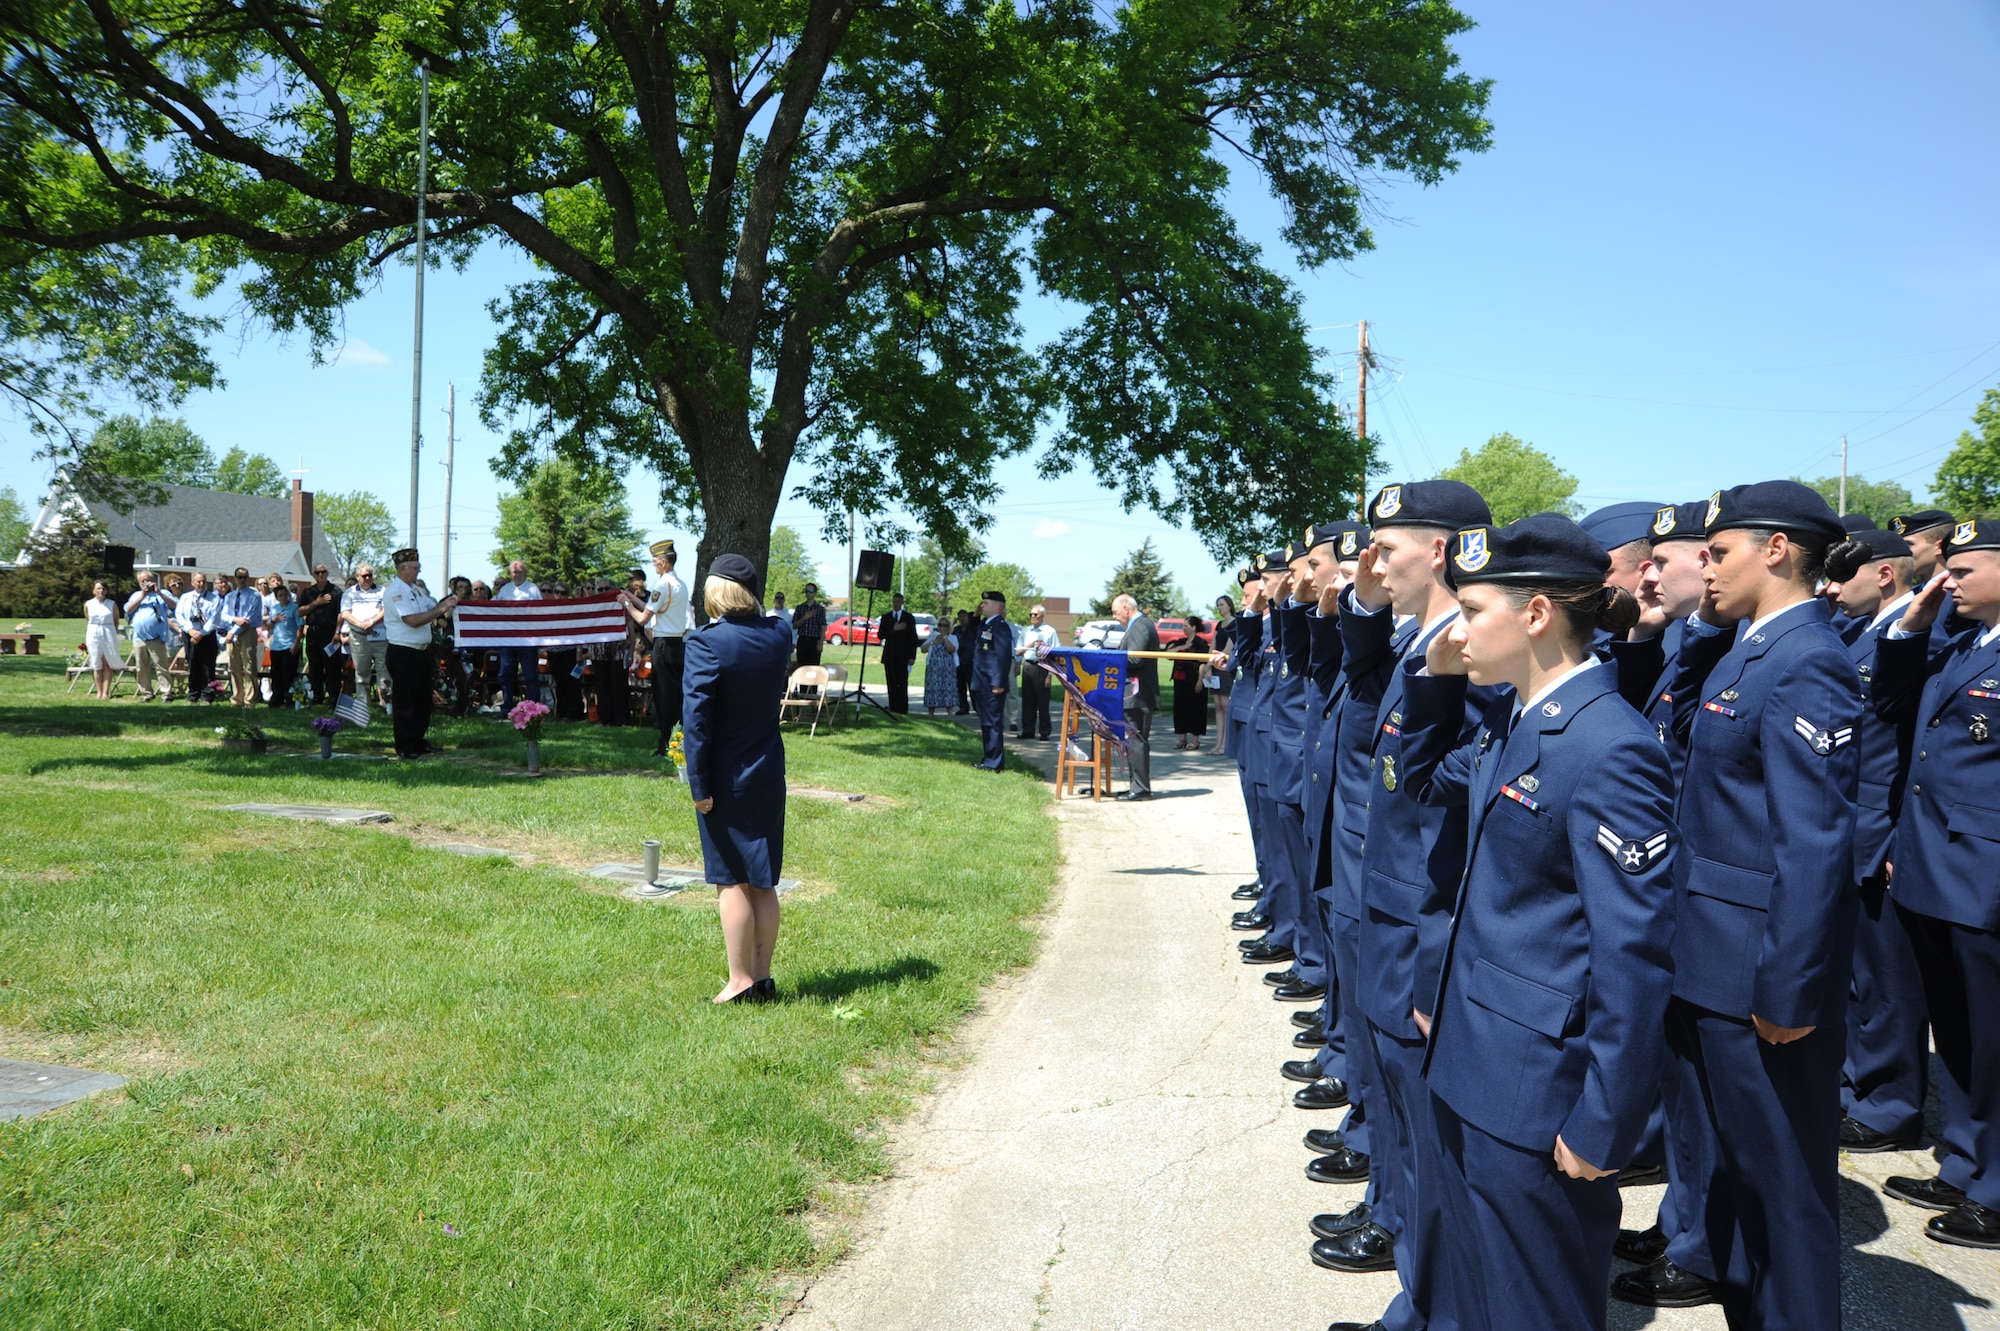 The 509th Security Forces Squadron from Whiteman Air Force Base, Mo., pays respects to 2nd Lt. George Whiteman during the 25th annual wreath-laying ceremony May 18, 2013, in Sedalia, Mo. The 509th SFS and Sedalia are “sister cities” who help each other during community events which support Airmen.  (U.S. Air Force photo by Senior Airman Brigitte N. Brantley/Released)